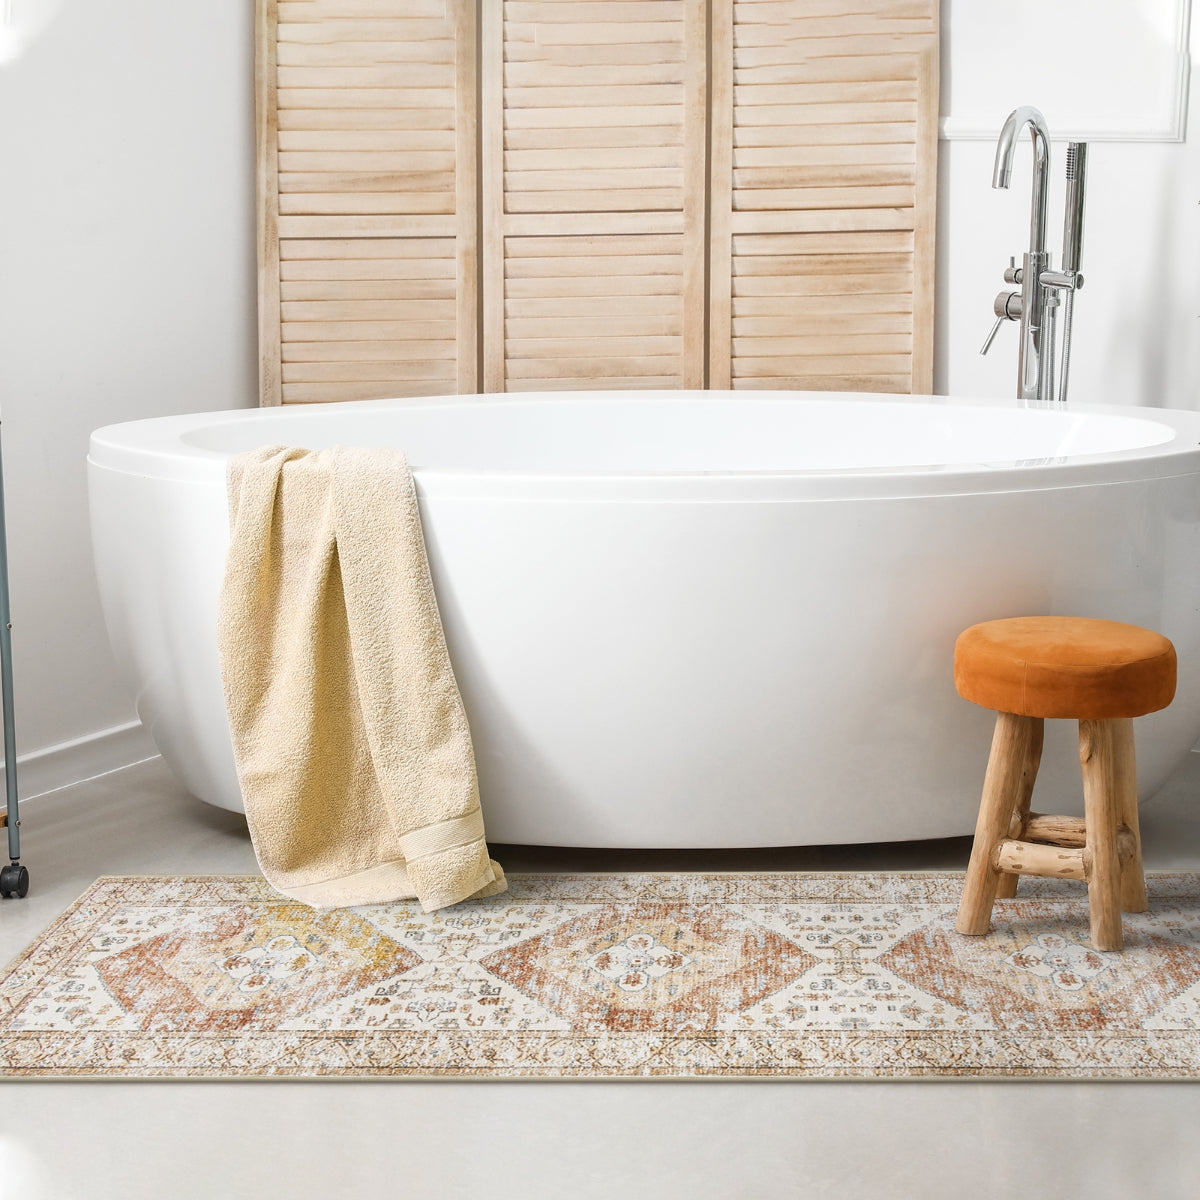 How to Maintain a Vintage Rug in the Bathroom - BREPURPOSED